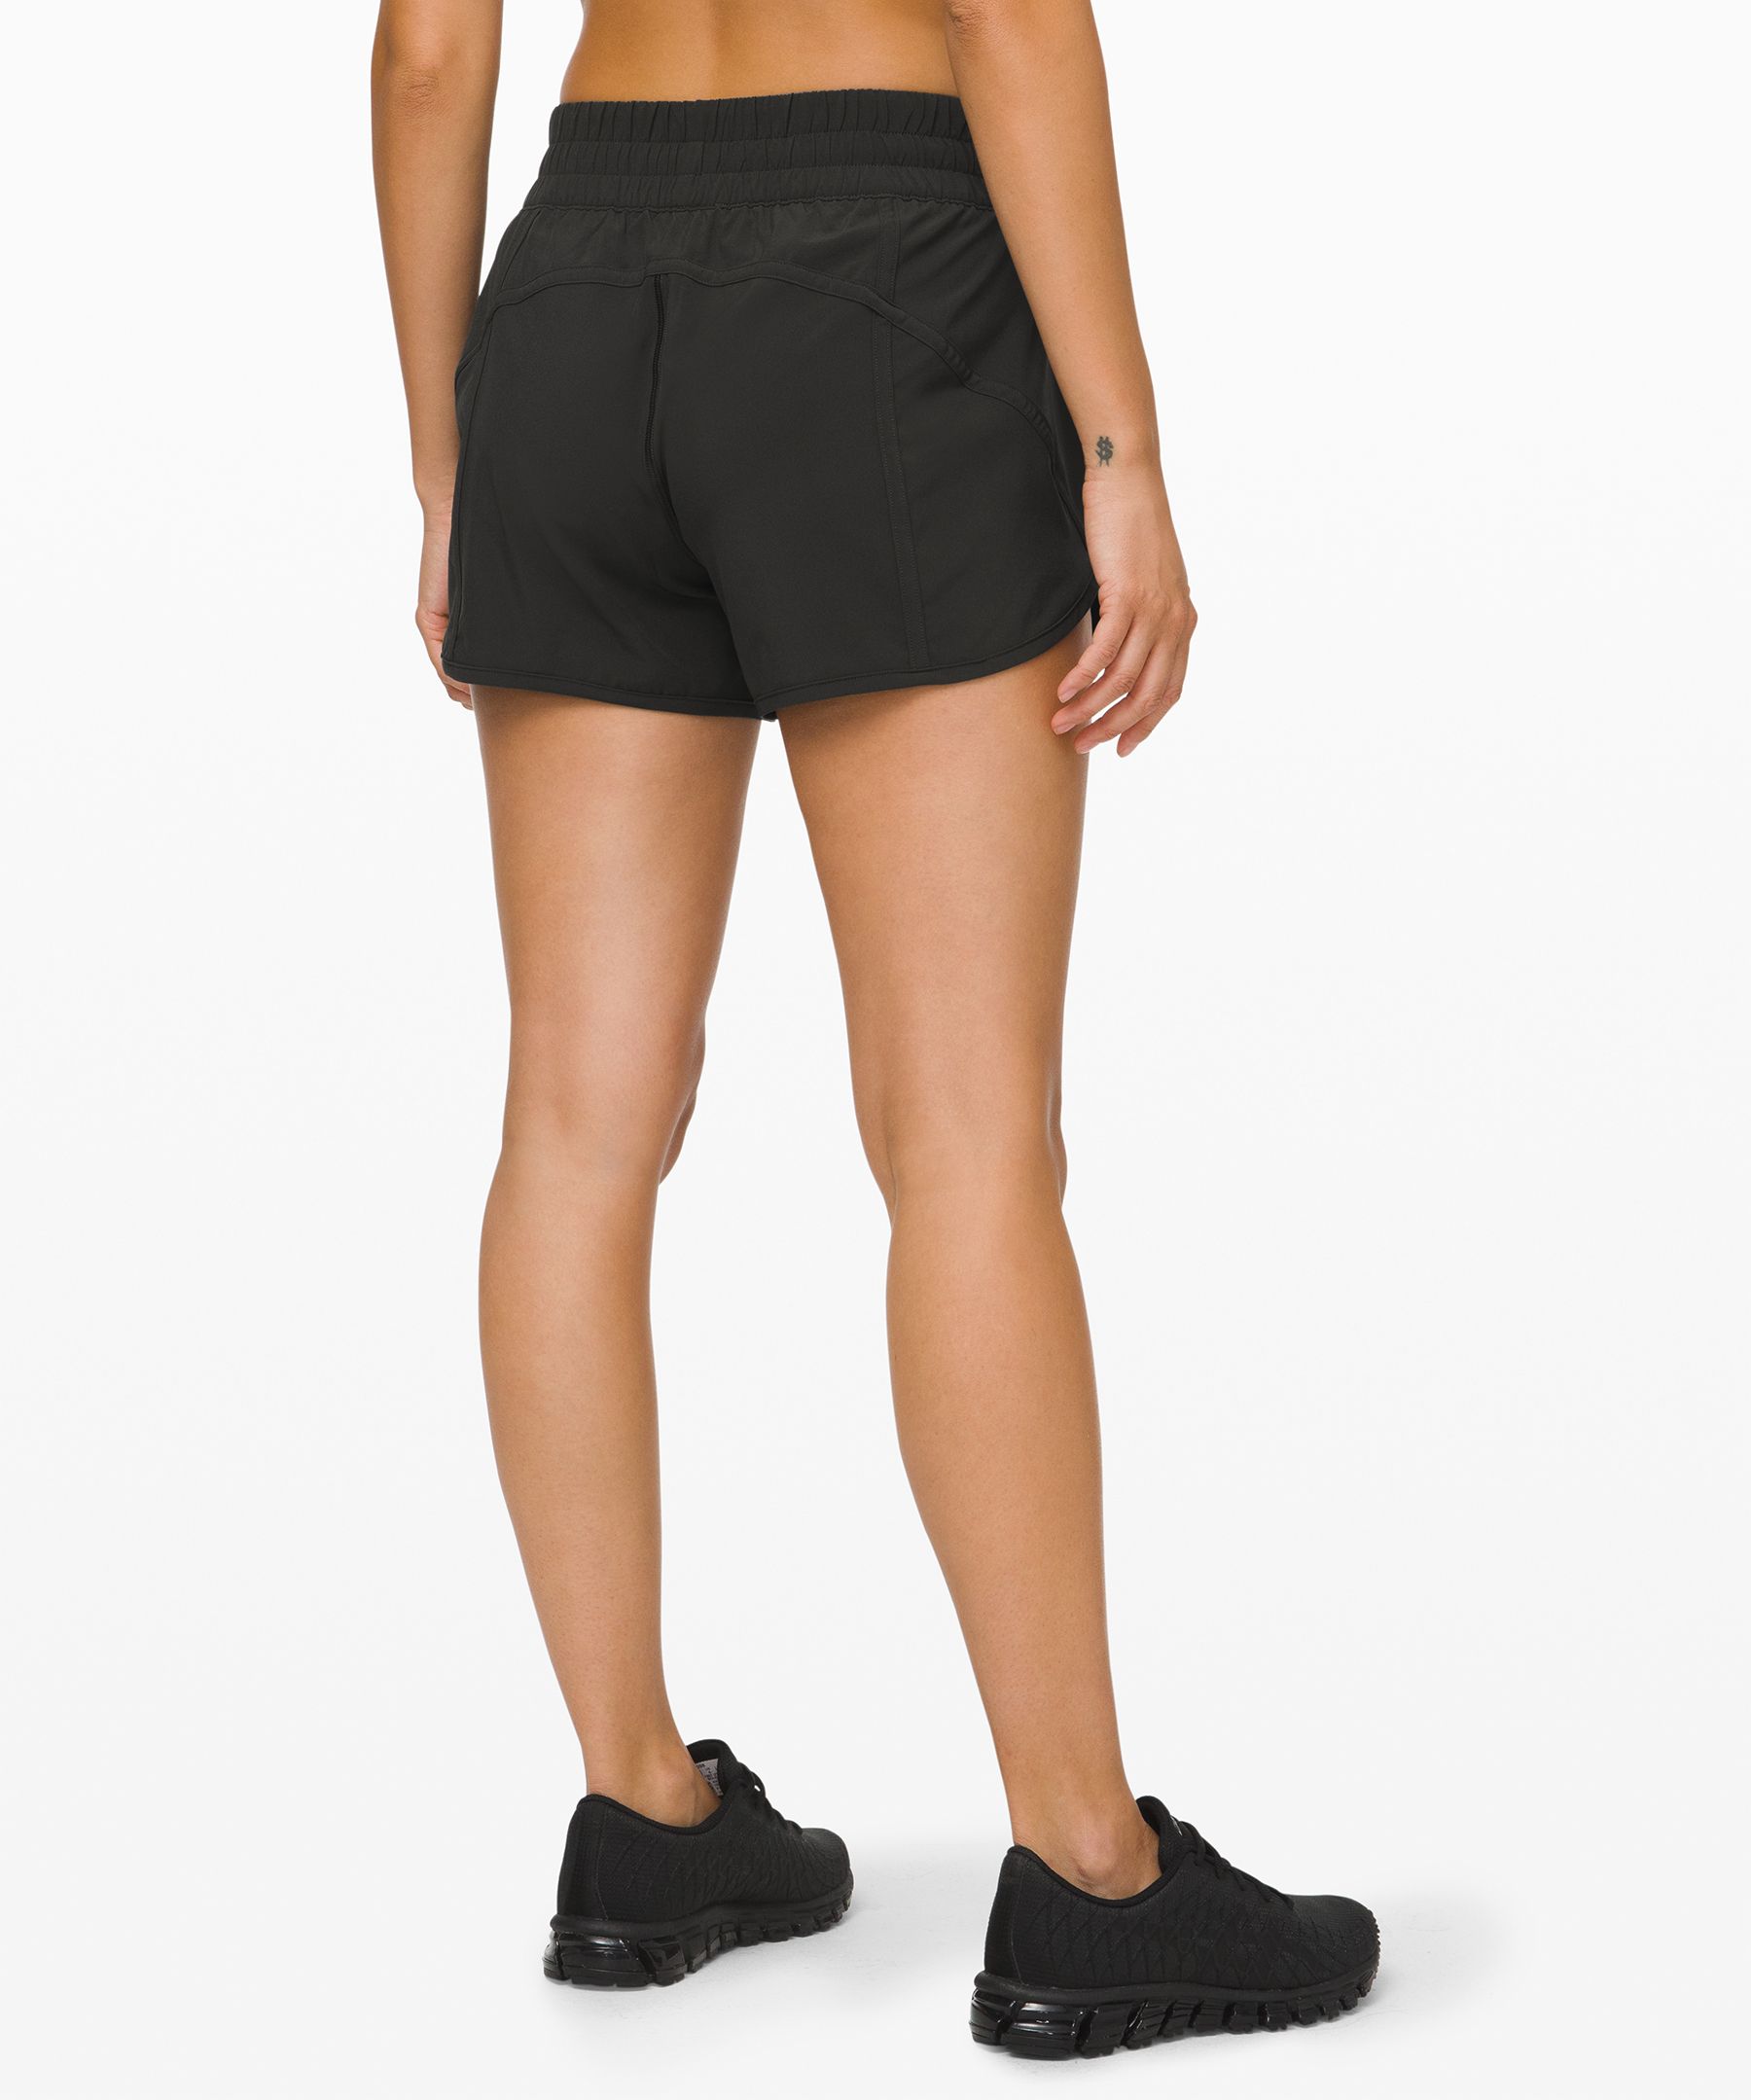 lululemon shorts with built in spandex